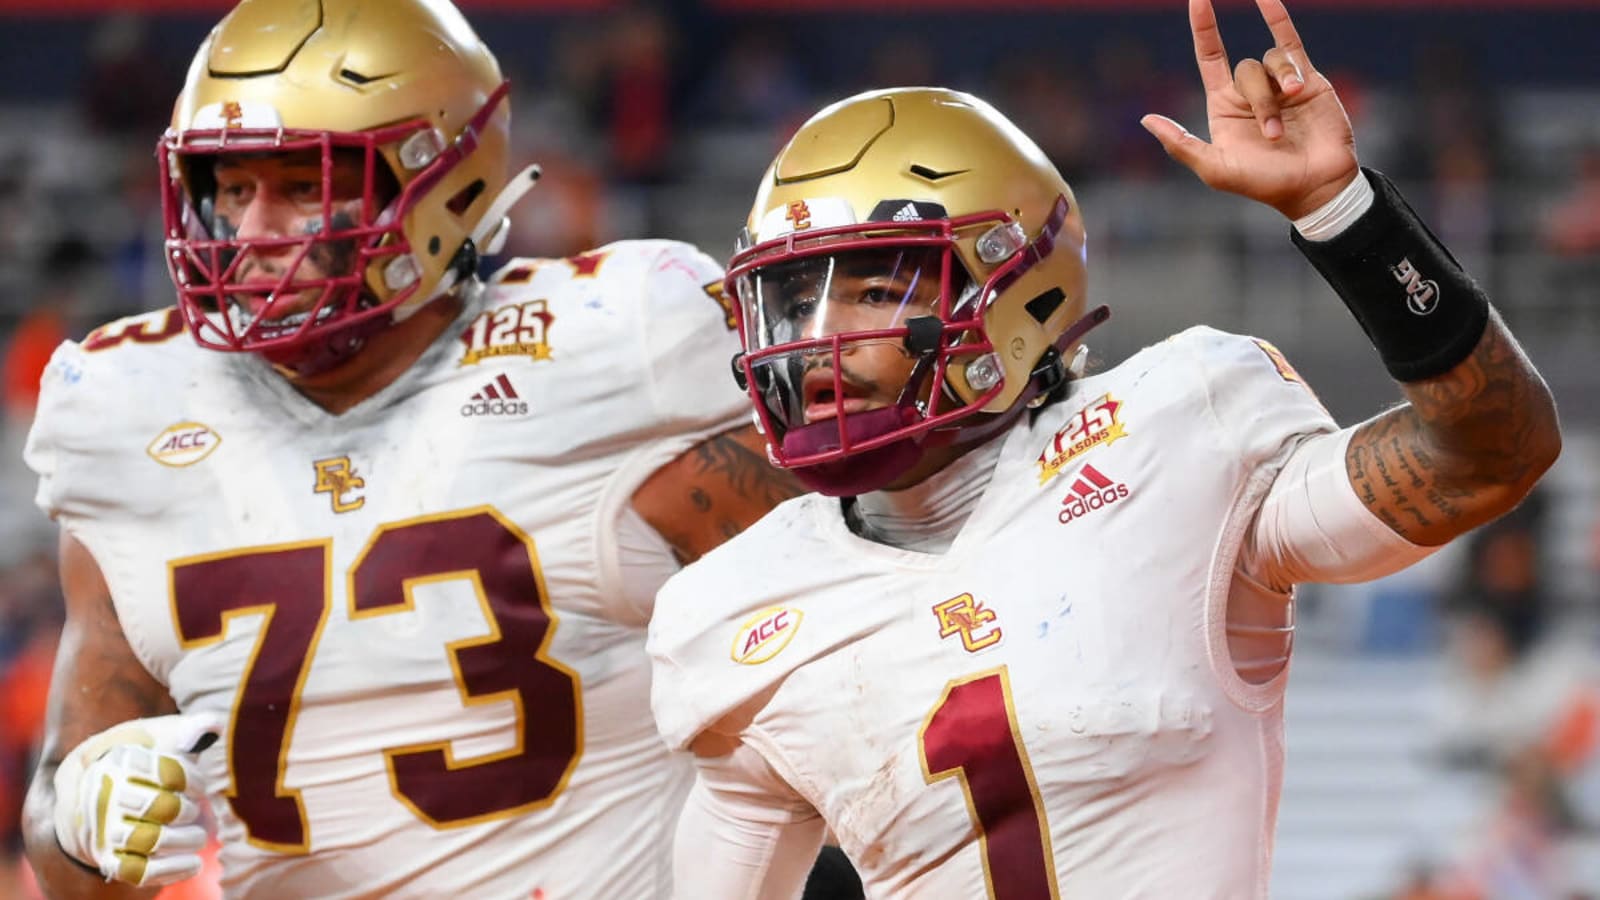 Houston Texans have a top-30 visit with Boston College offensive lineman Christian Mahogany